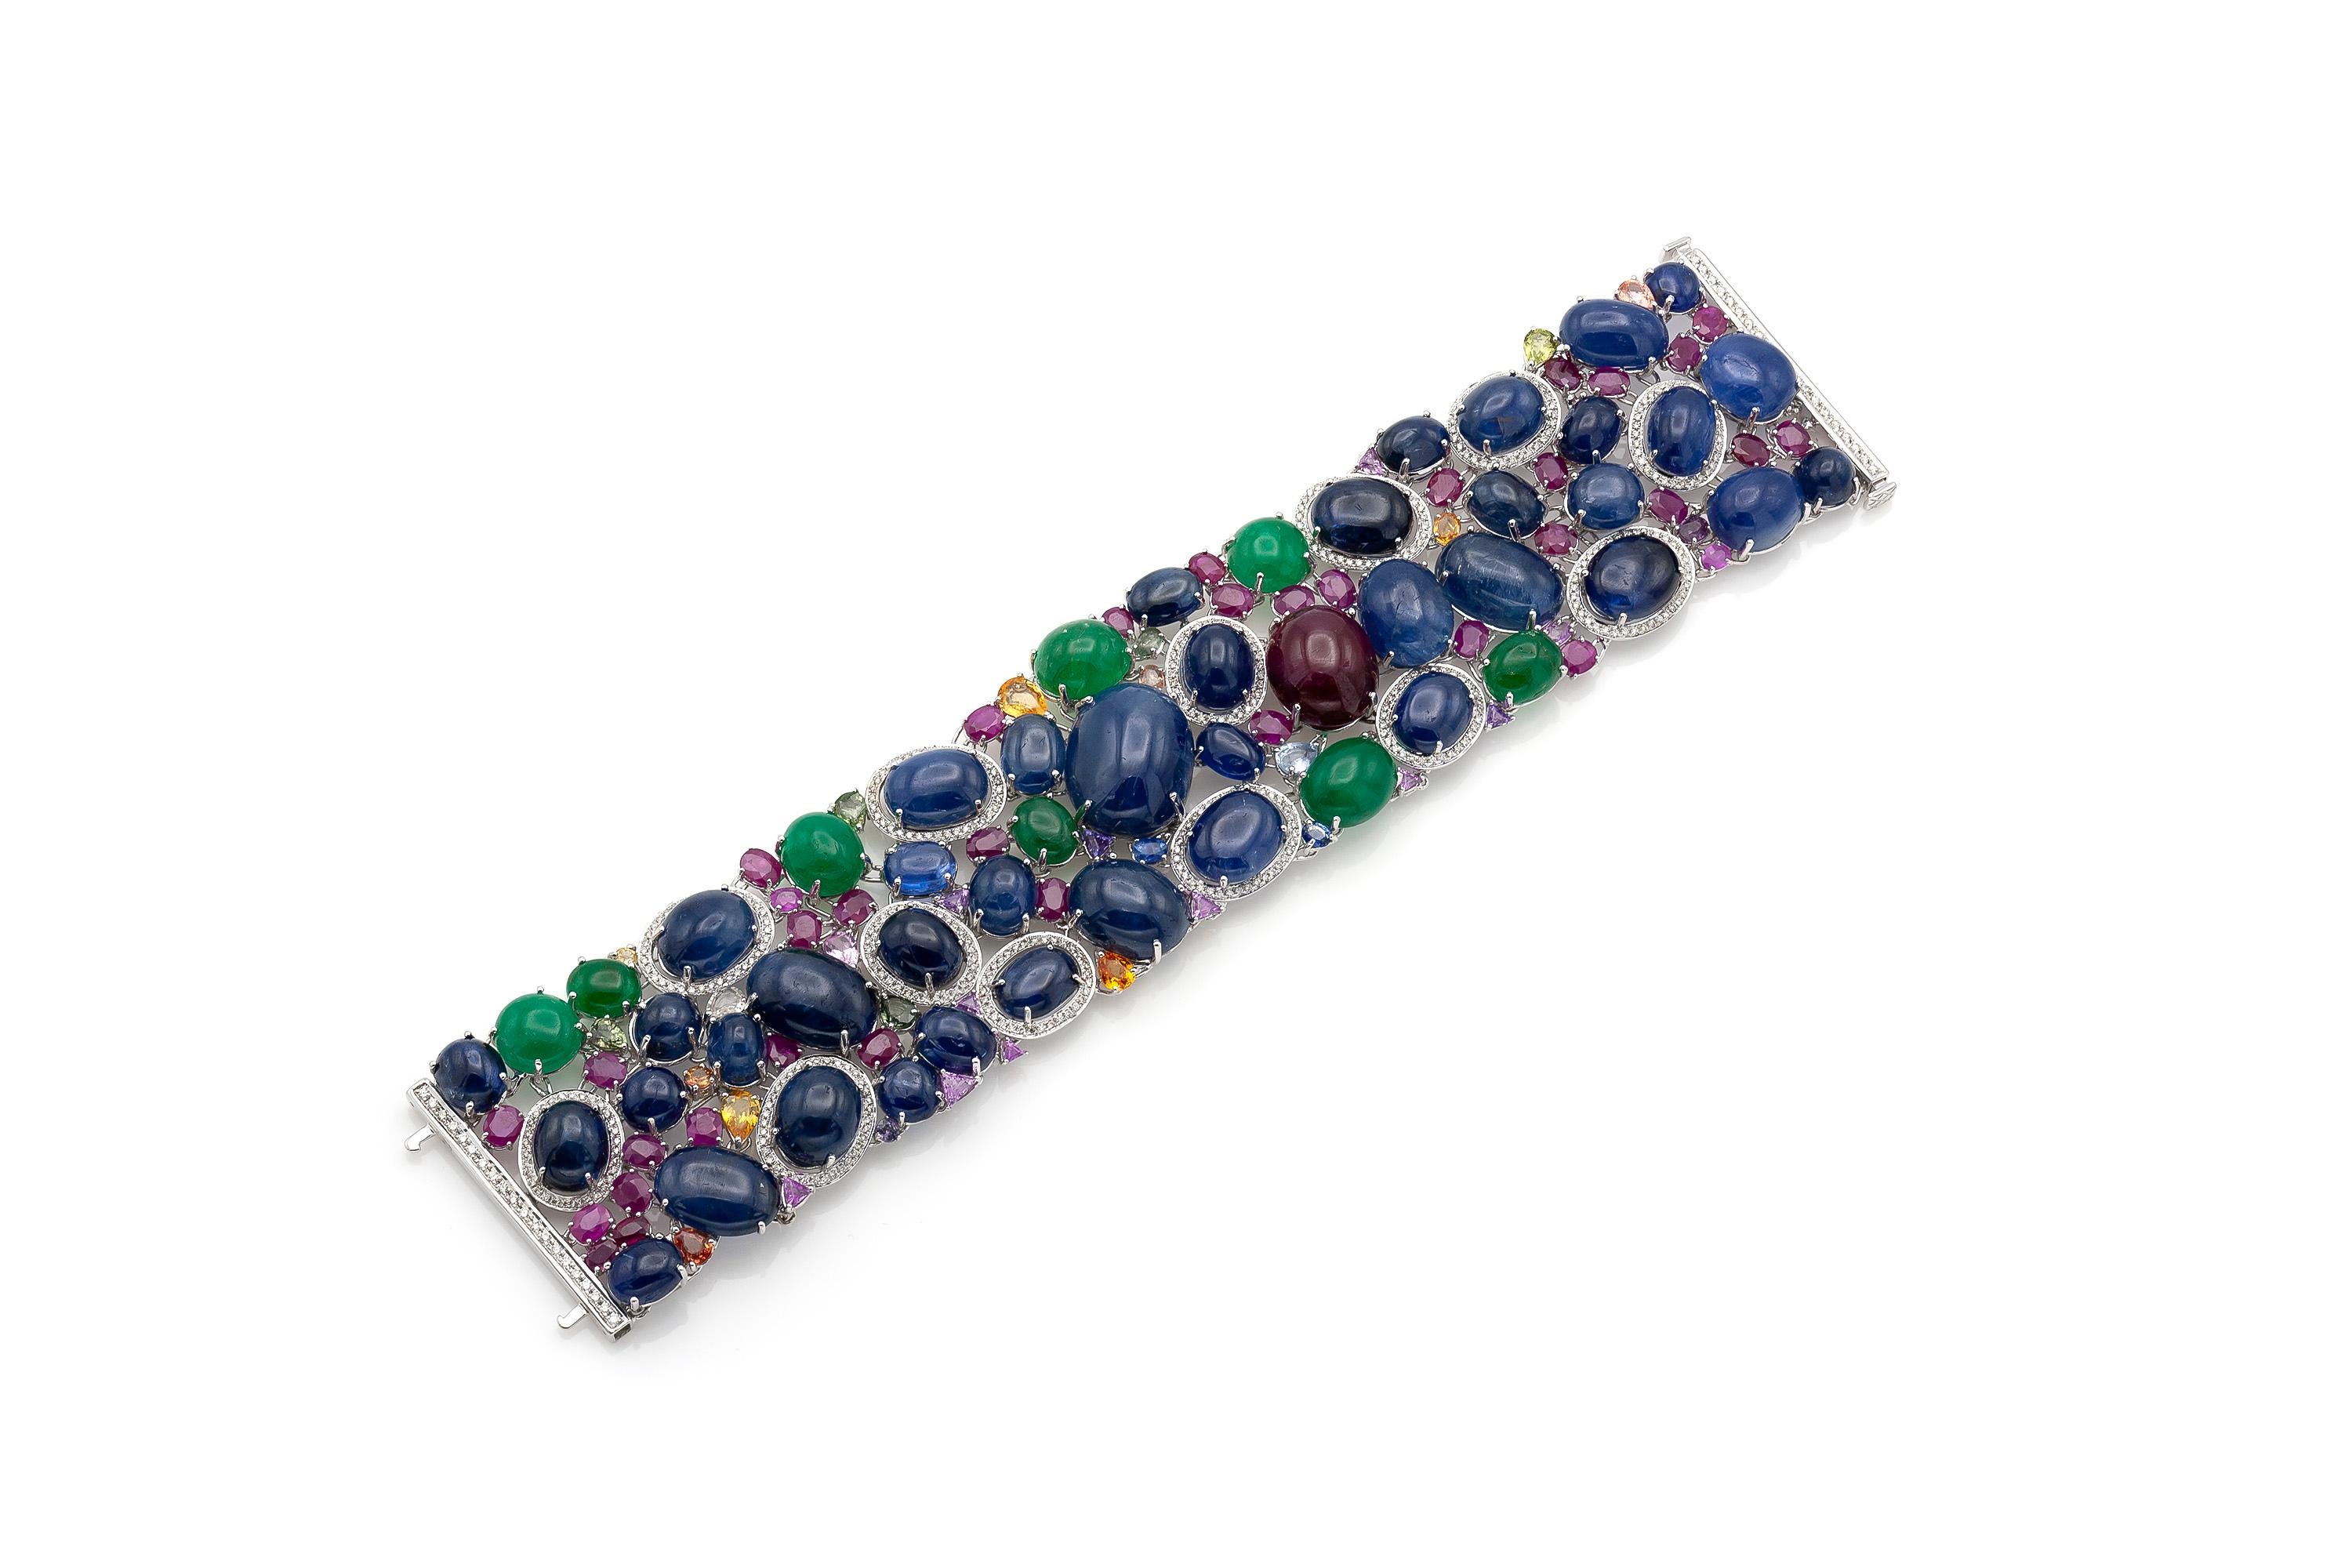 Finely crafted in 18k white gold with:
8 Cabochon Emeralds weighing a total of 29.43 carats
40 Cabochon Sapphires weighing a total of 270.26 carats
1 Cabochon Ruby weighing 36.14 carats
The bracelet features 473 diamonds weighing a total of